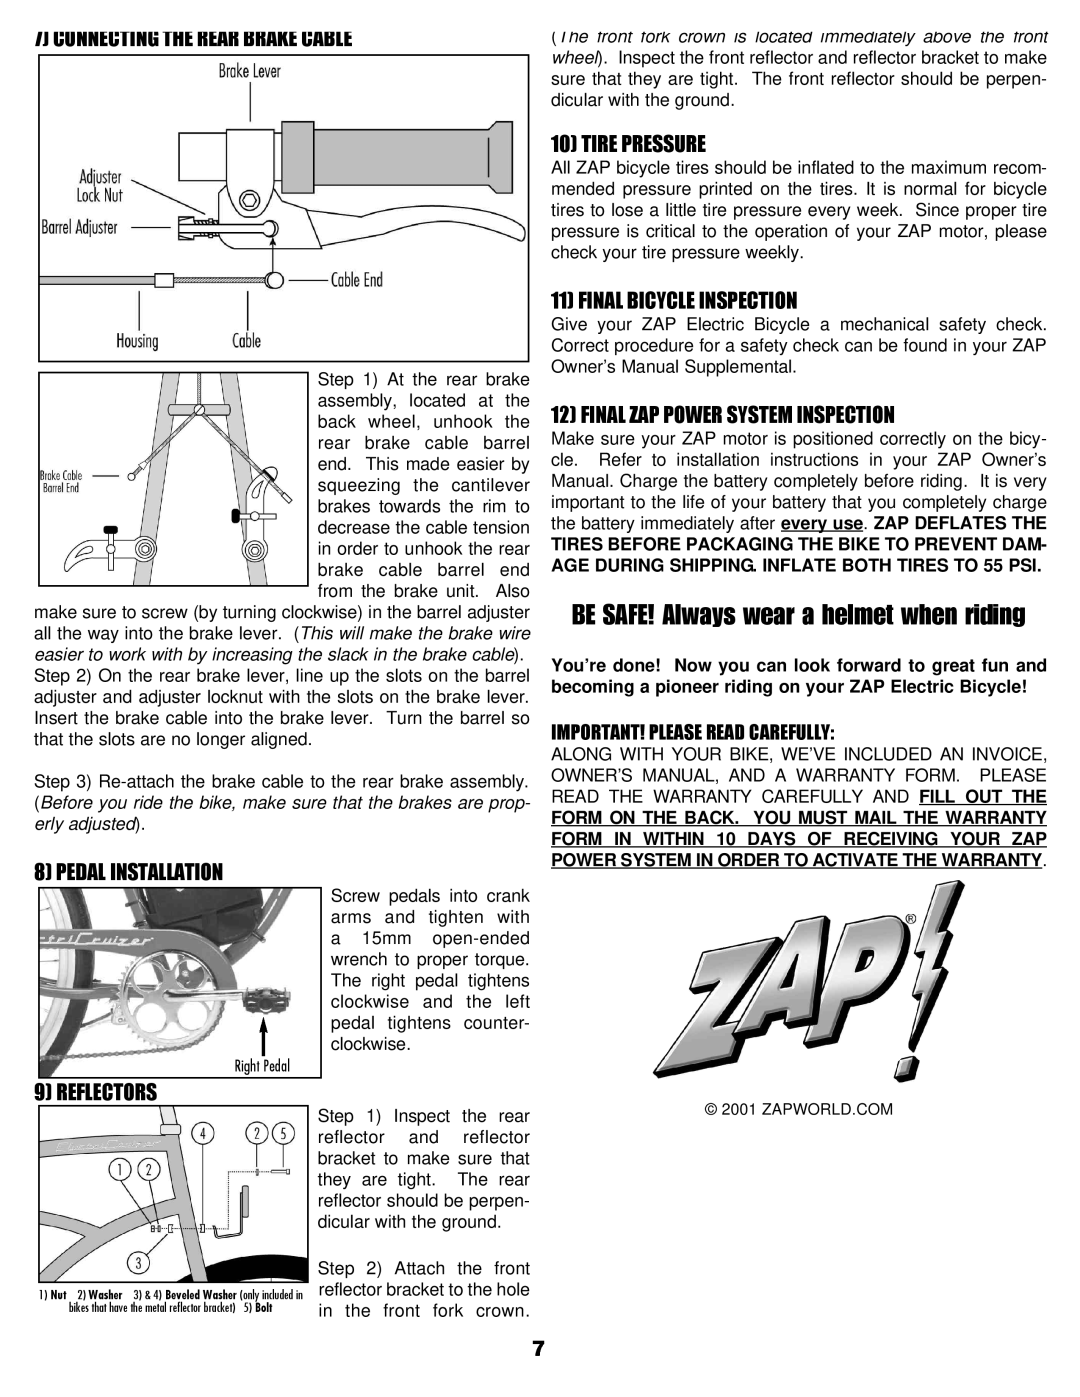 Zap DX Connecting The Rear Brake Cable, Tire Pressure, Pedal Installation, Reflectors, Final Bicycle Inspection 